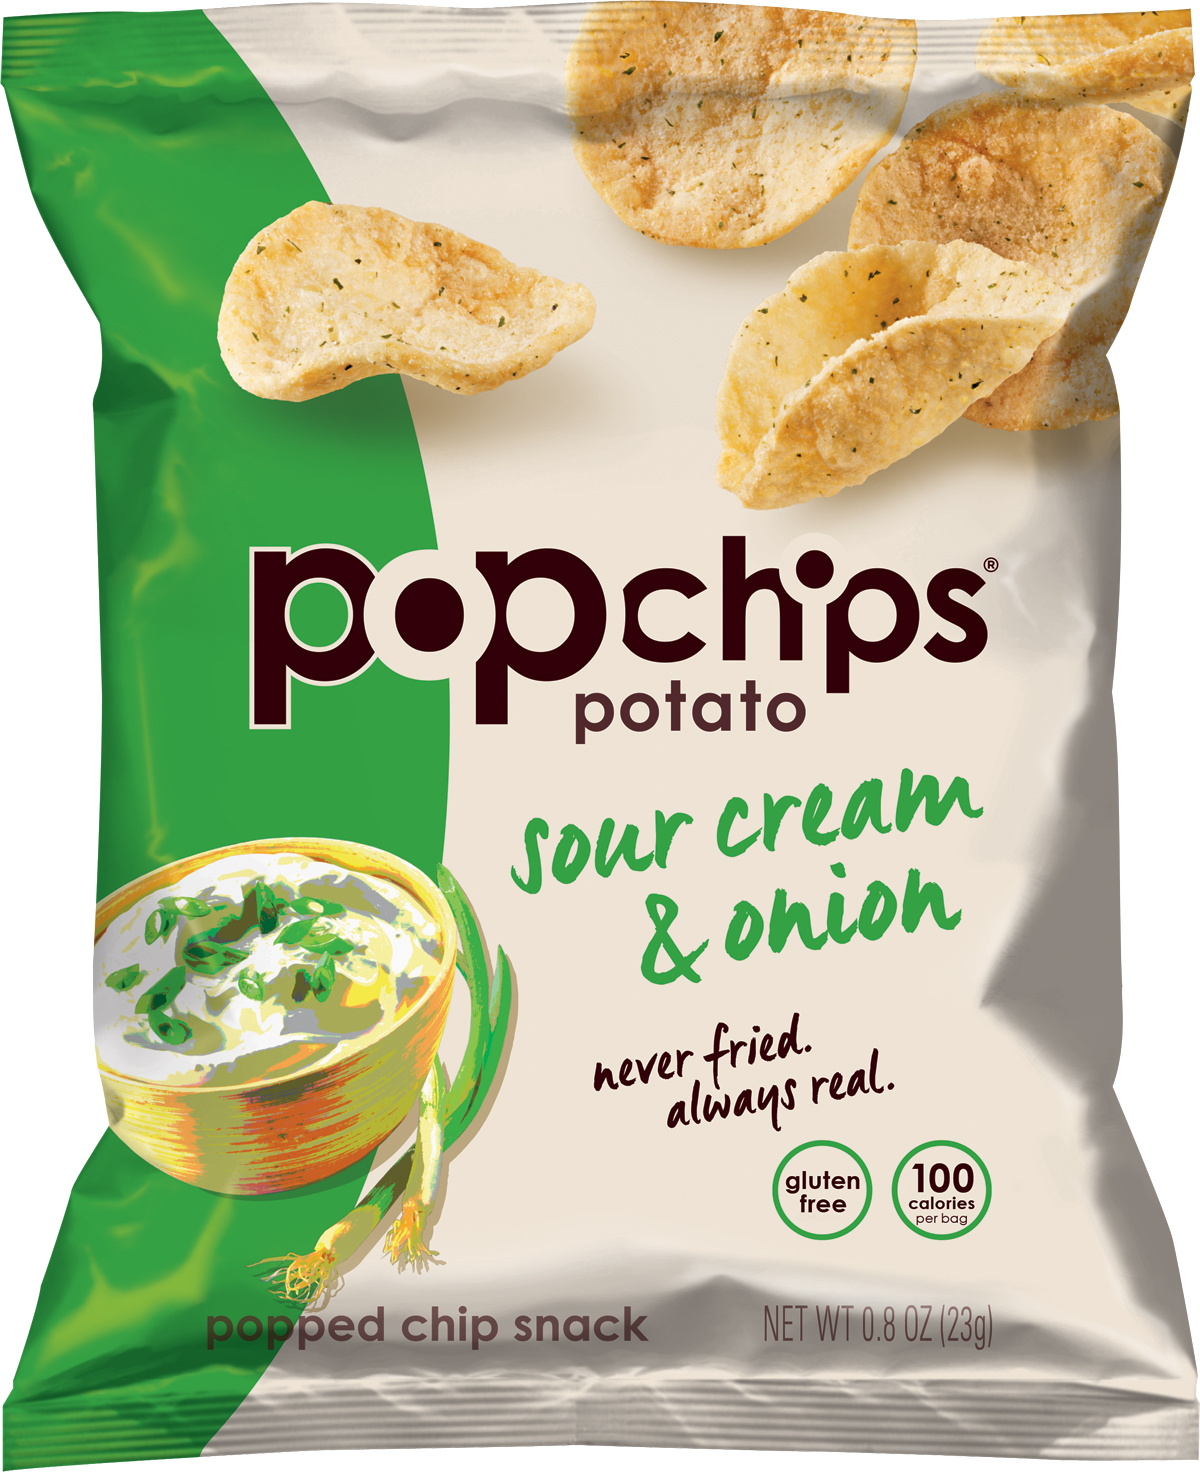 Healthy Office Snacks, Popchips Sour Cream & Onion